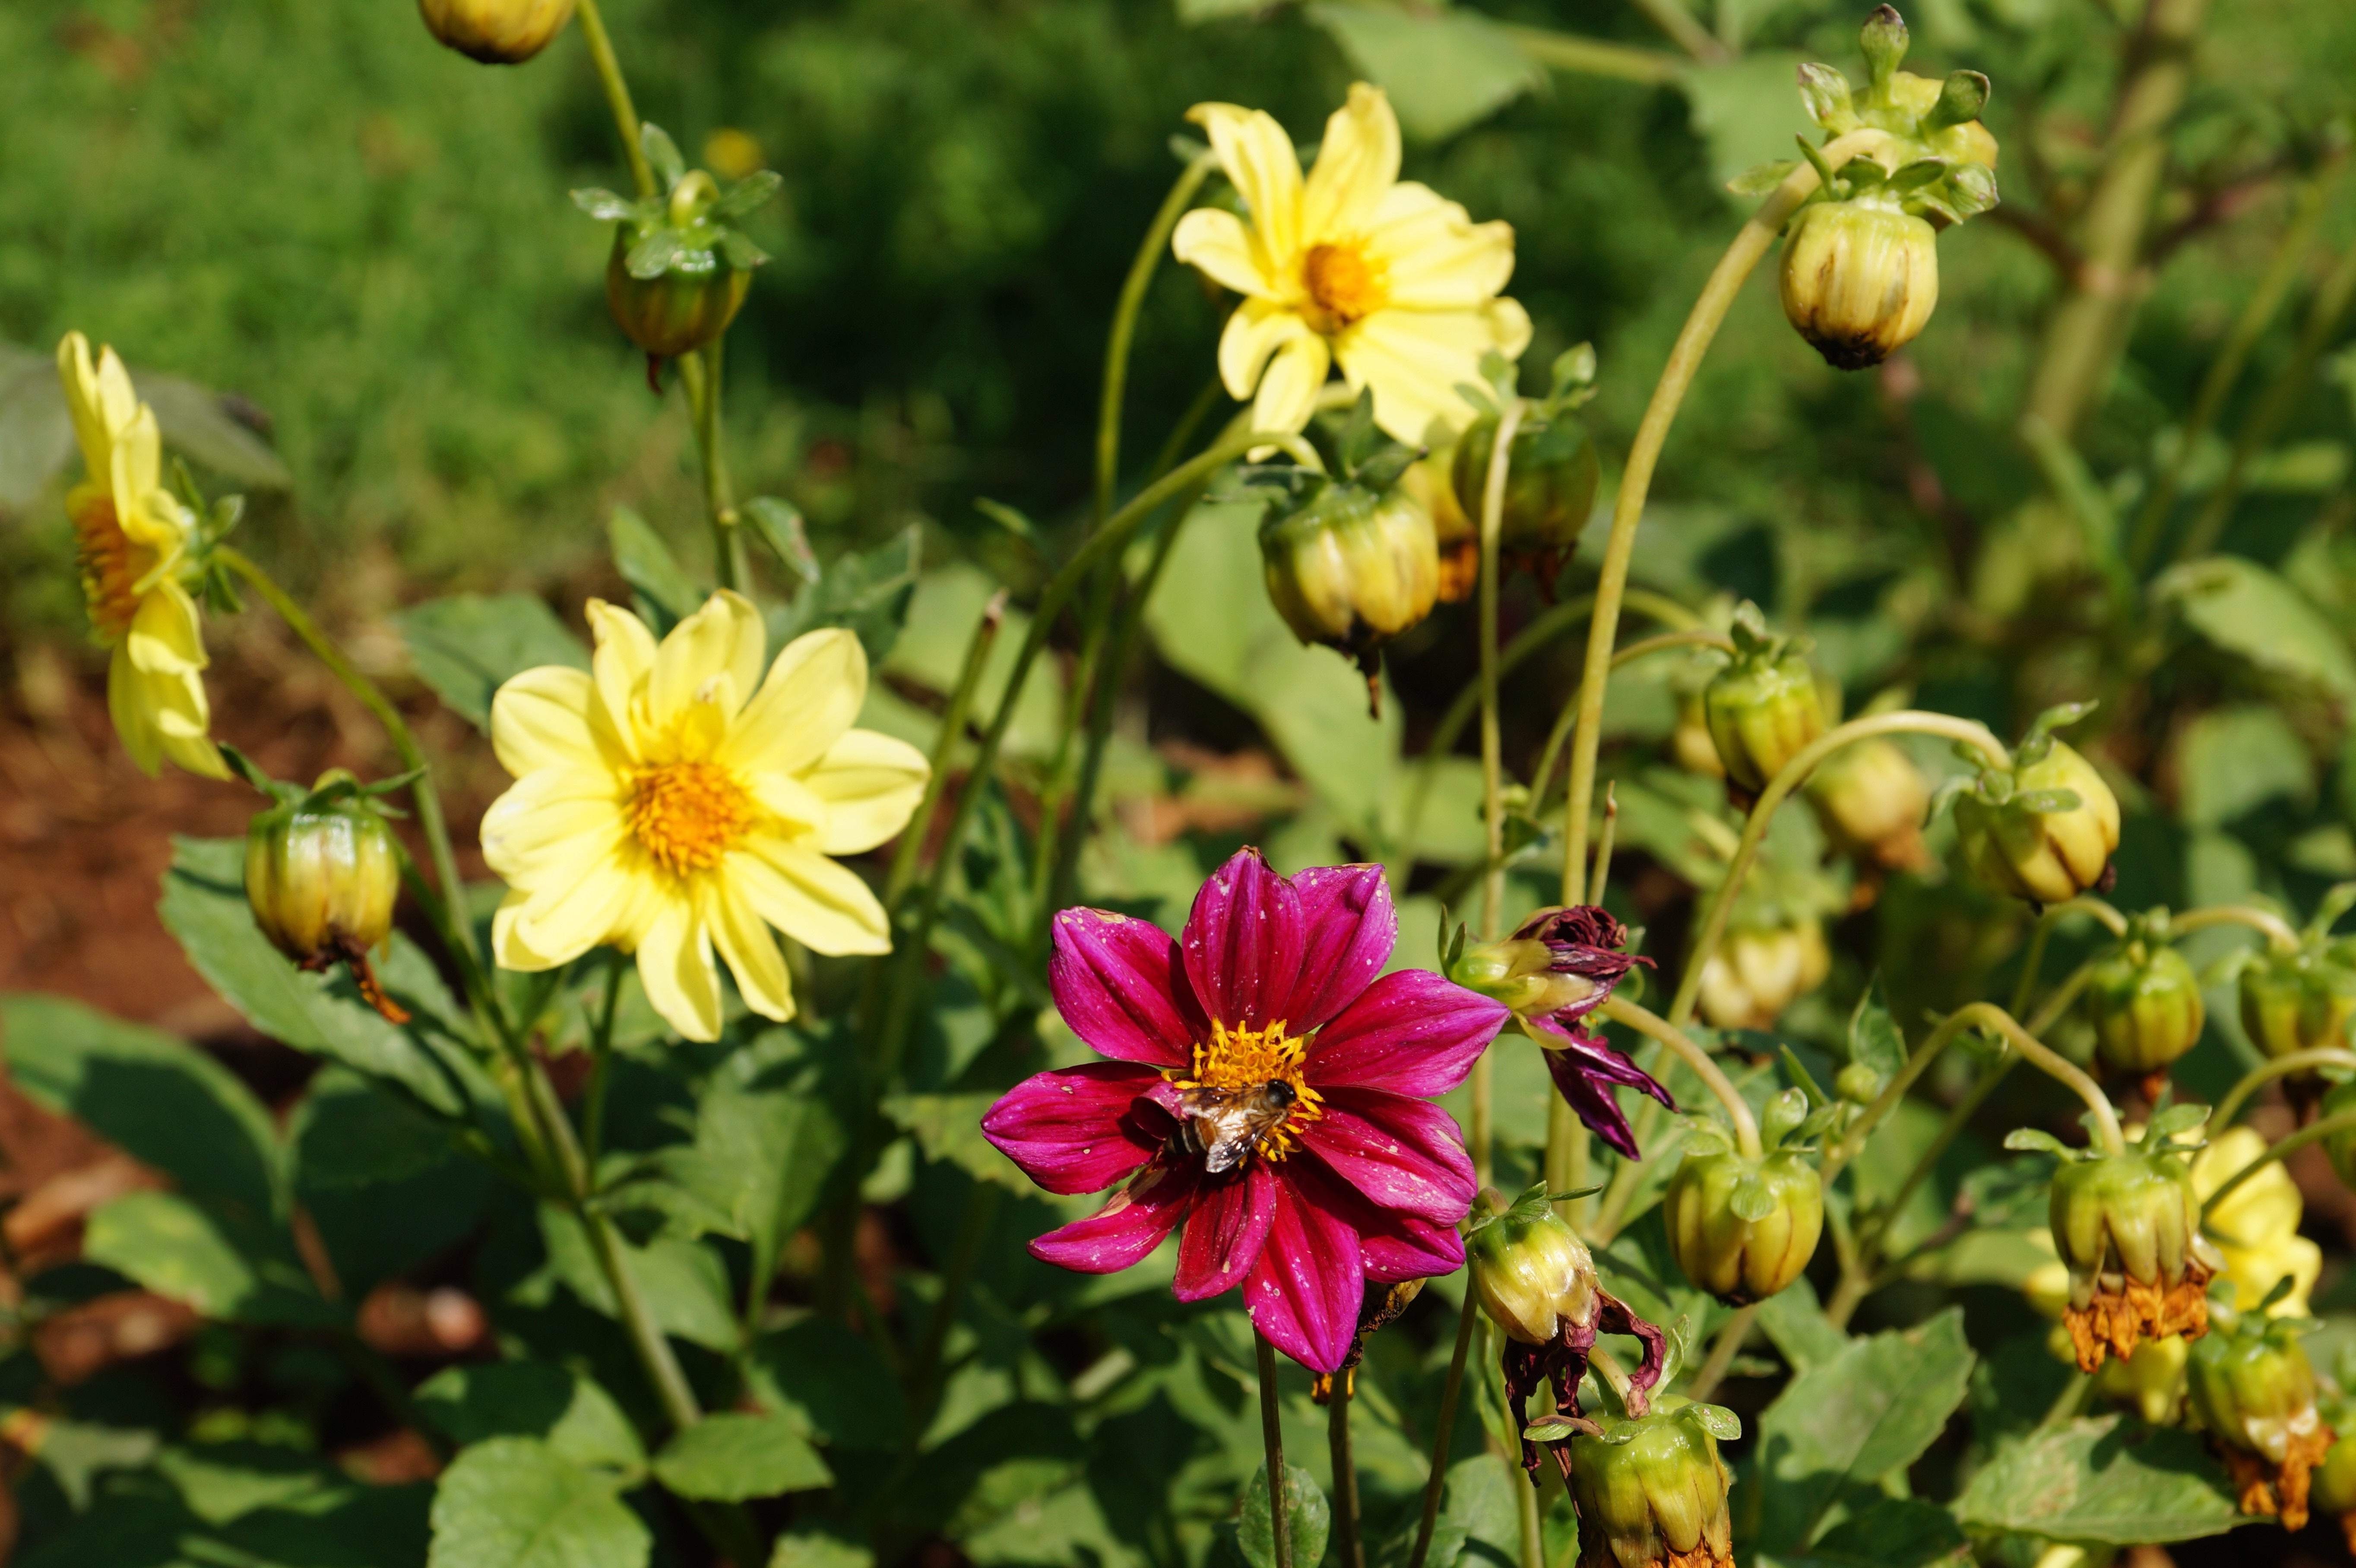 shallow focus photography of yellow and pink flowers during daytime